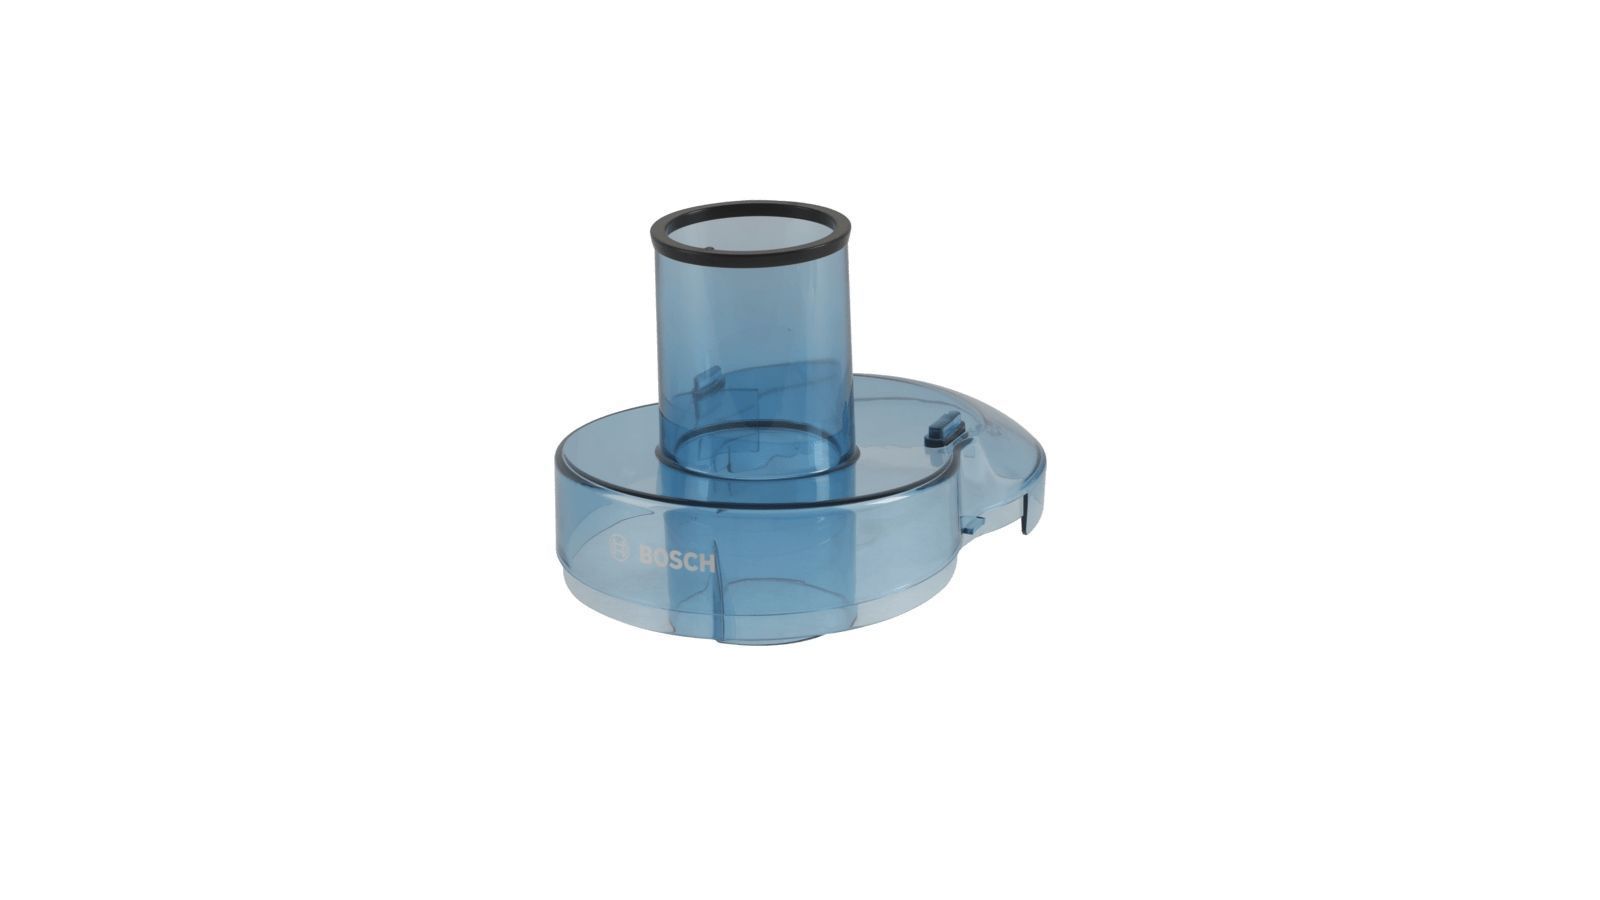 Lid, Cover for Bosch Siemens Juicers - 00674545 BSH